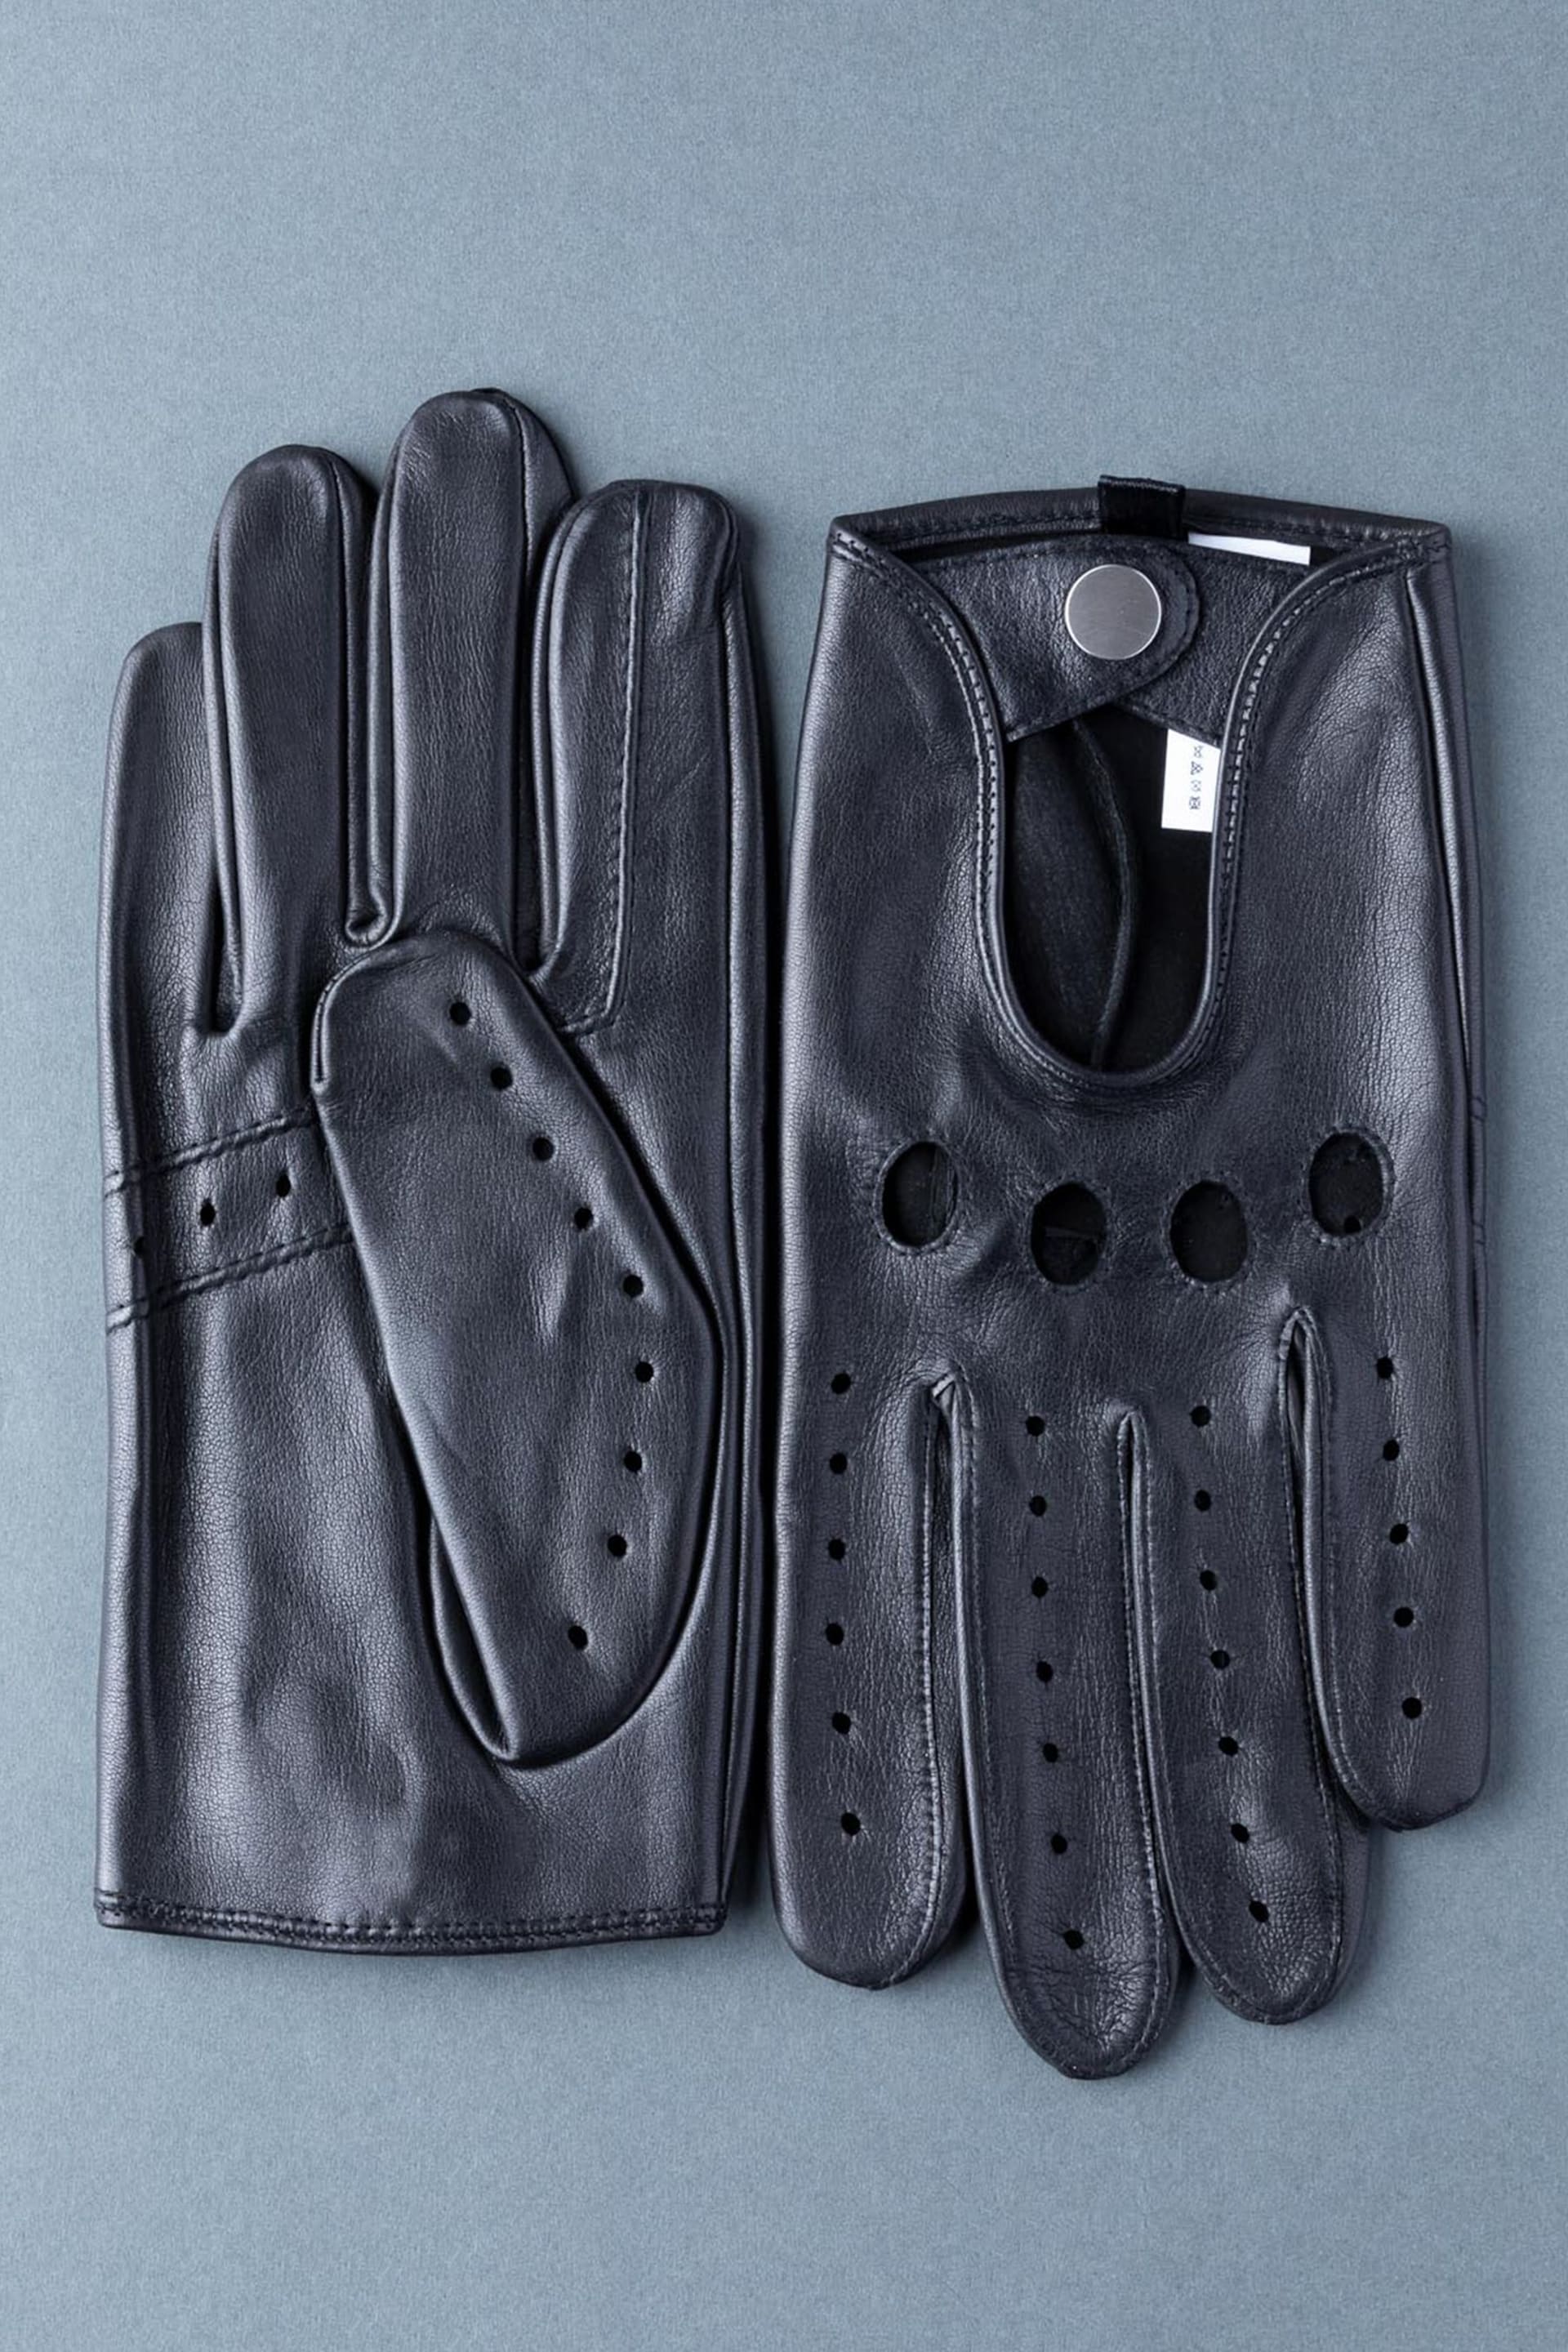 Lakeland Leather Black Monza Leather Driving Gloves - Image 1 of 3